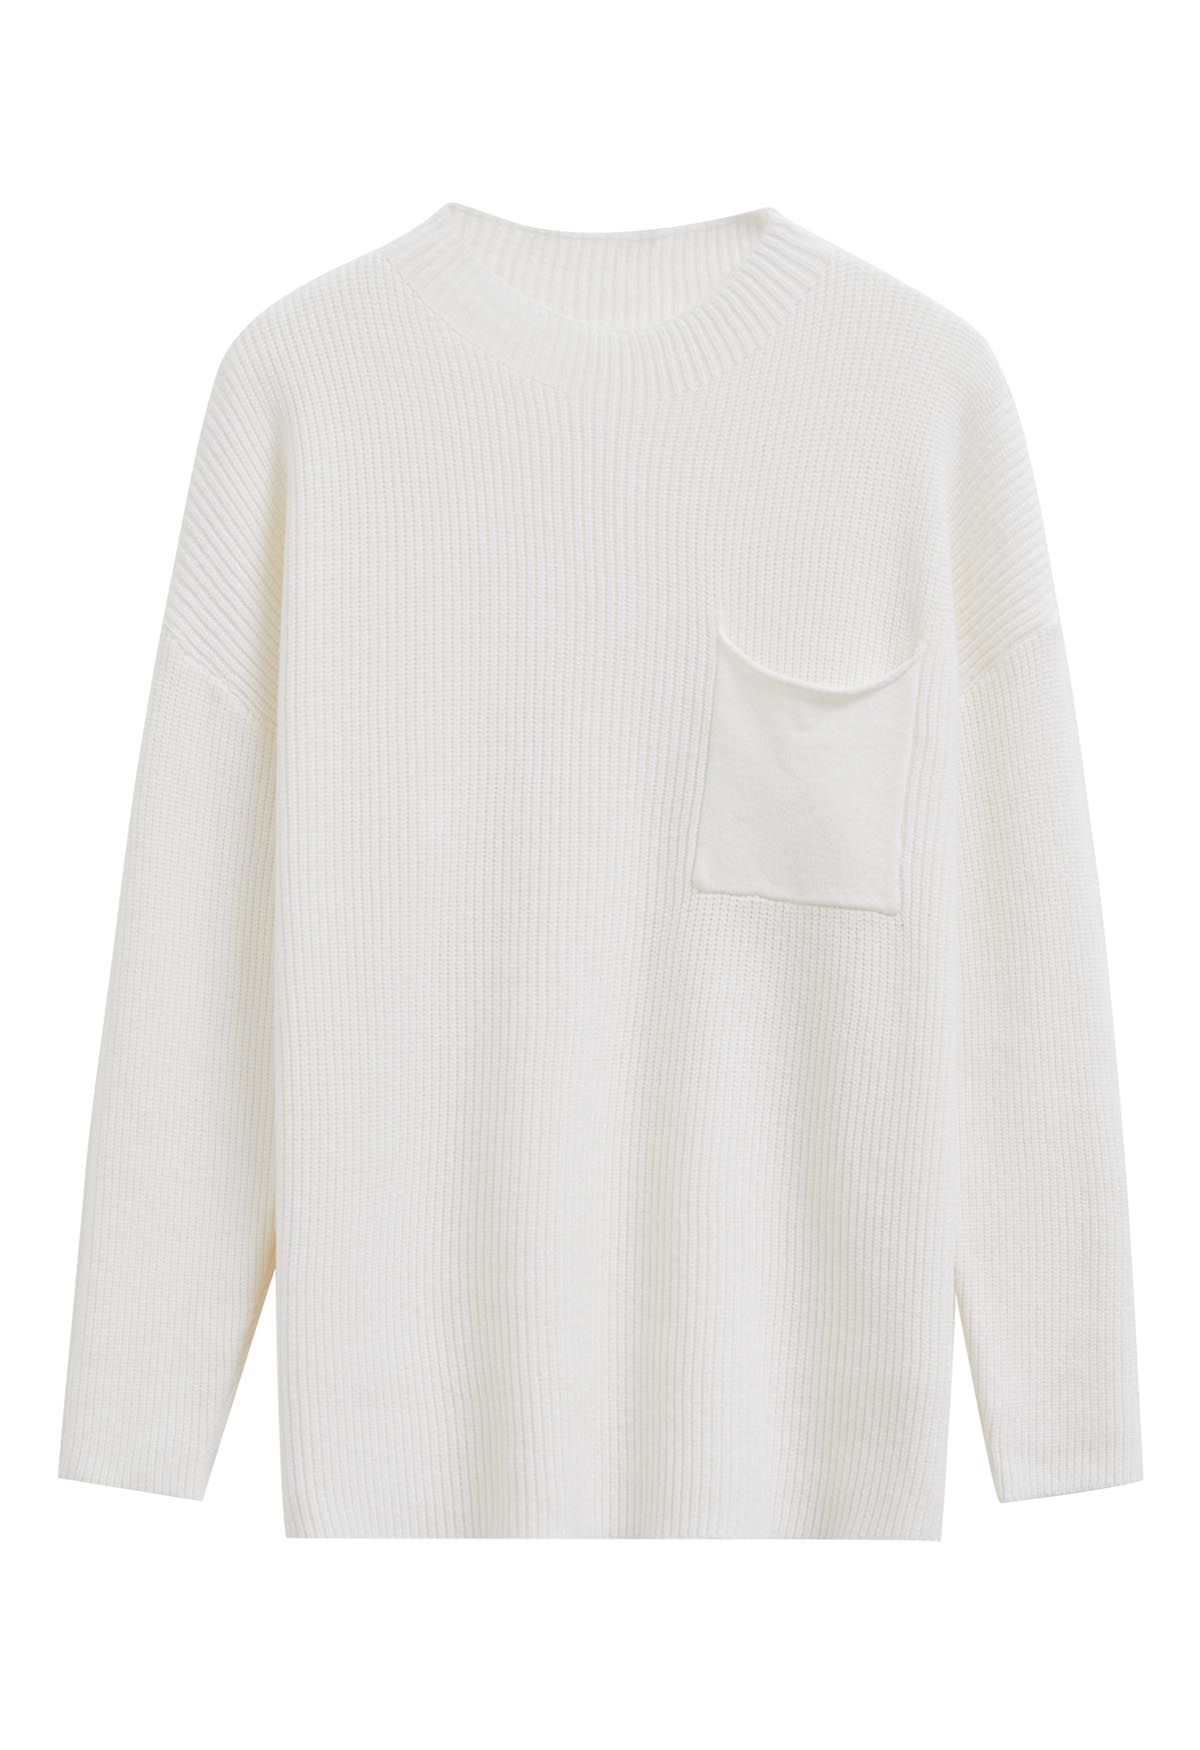 Patch Pocket Ribbed Knit Sweater in White